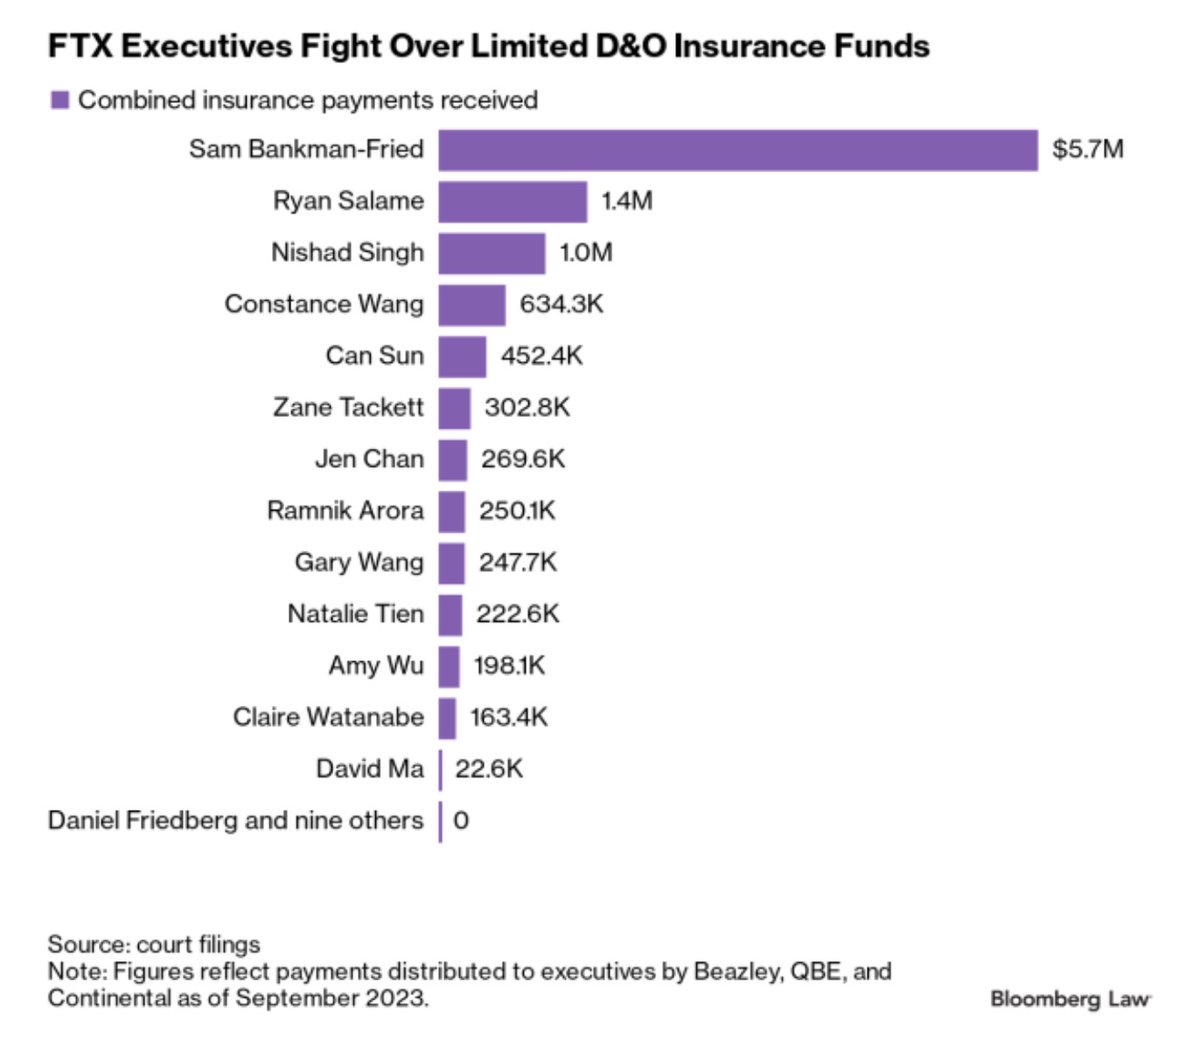 Here is how much insurance FTX directors were paid to cover legal costs. 10 directors received nothing while others wiped out 50% of the $20 million coverage. news.bloomberglaw.com/insurance/ftx-…